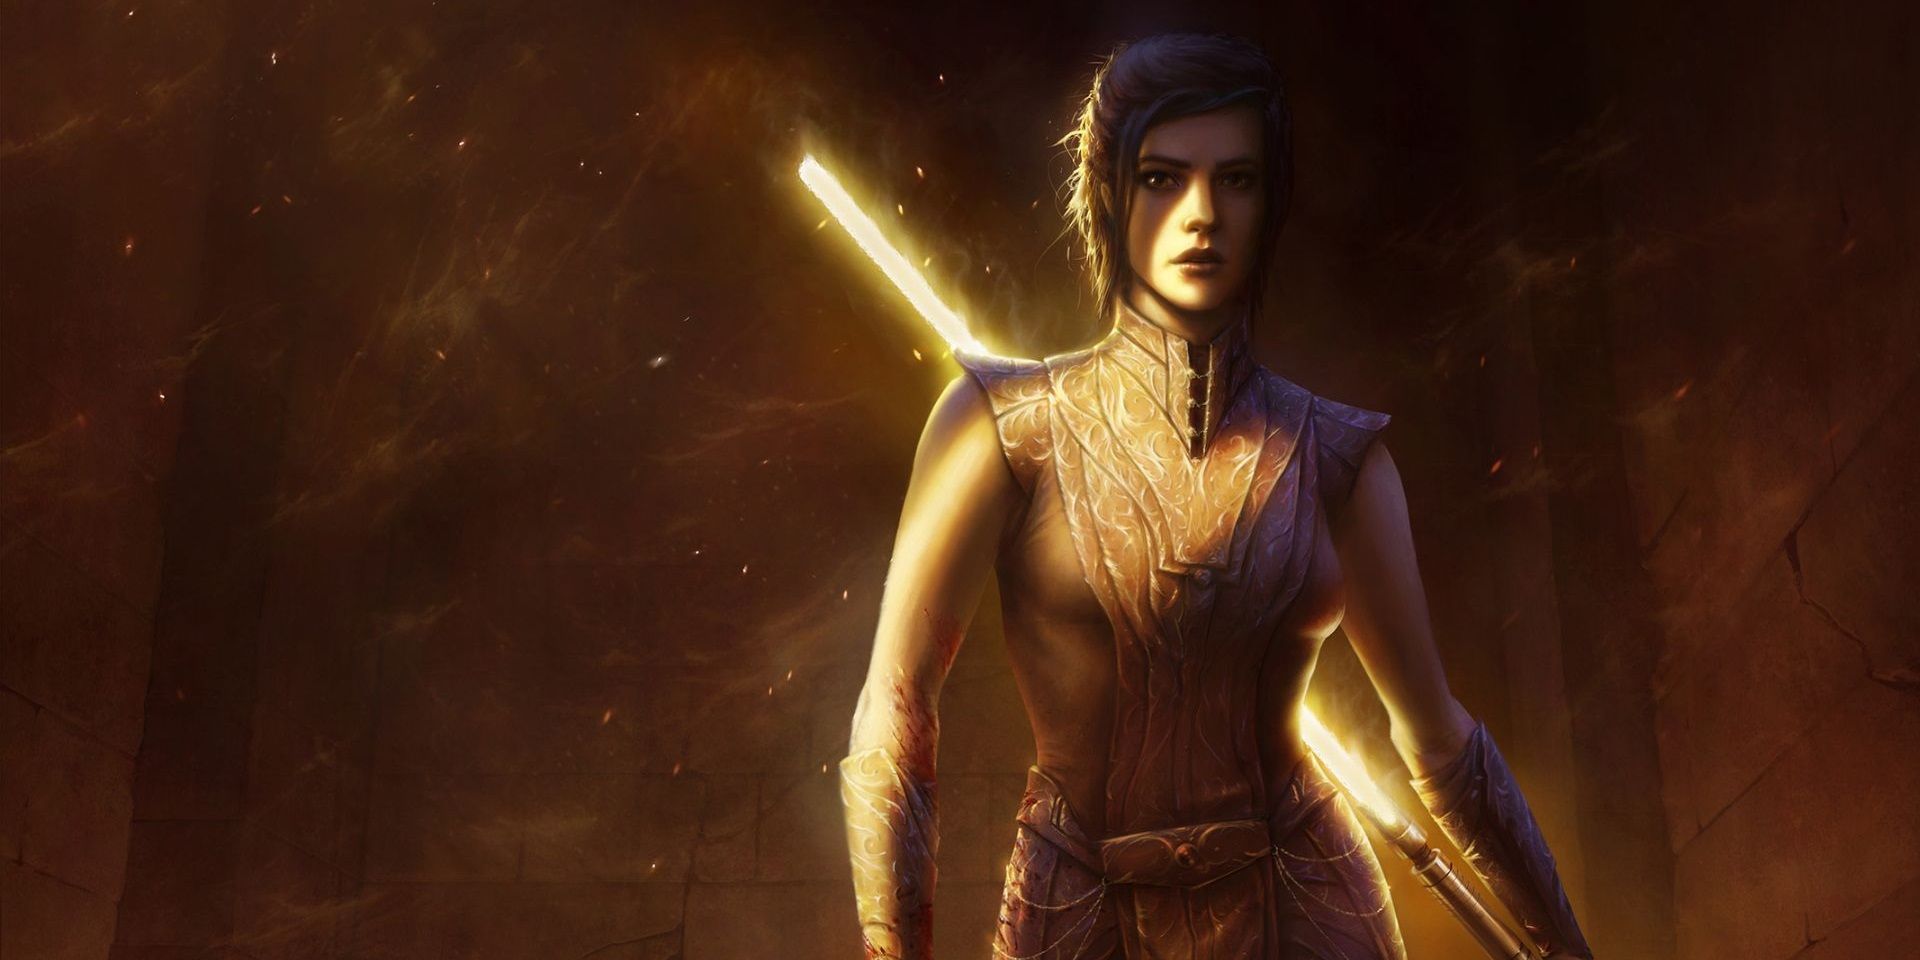 Knights of the Old Republic's Bastila Shan is one of Star Wars' m...